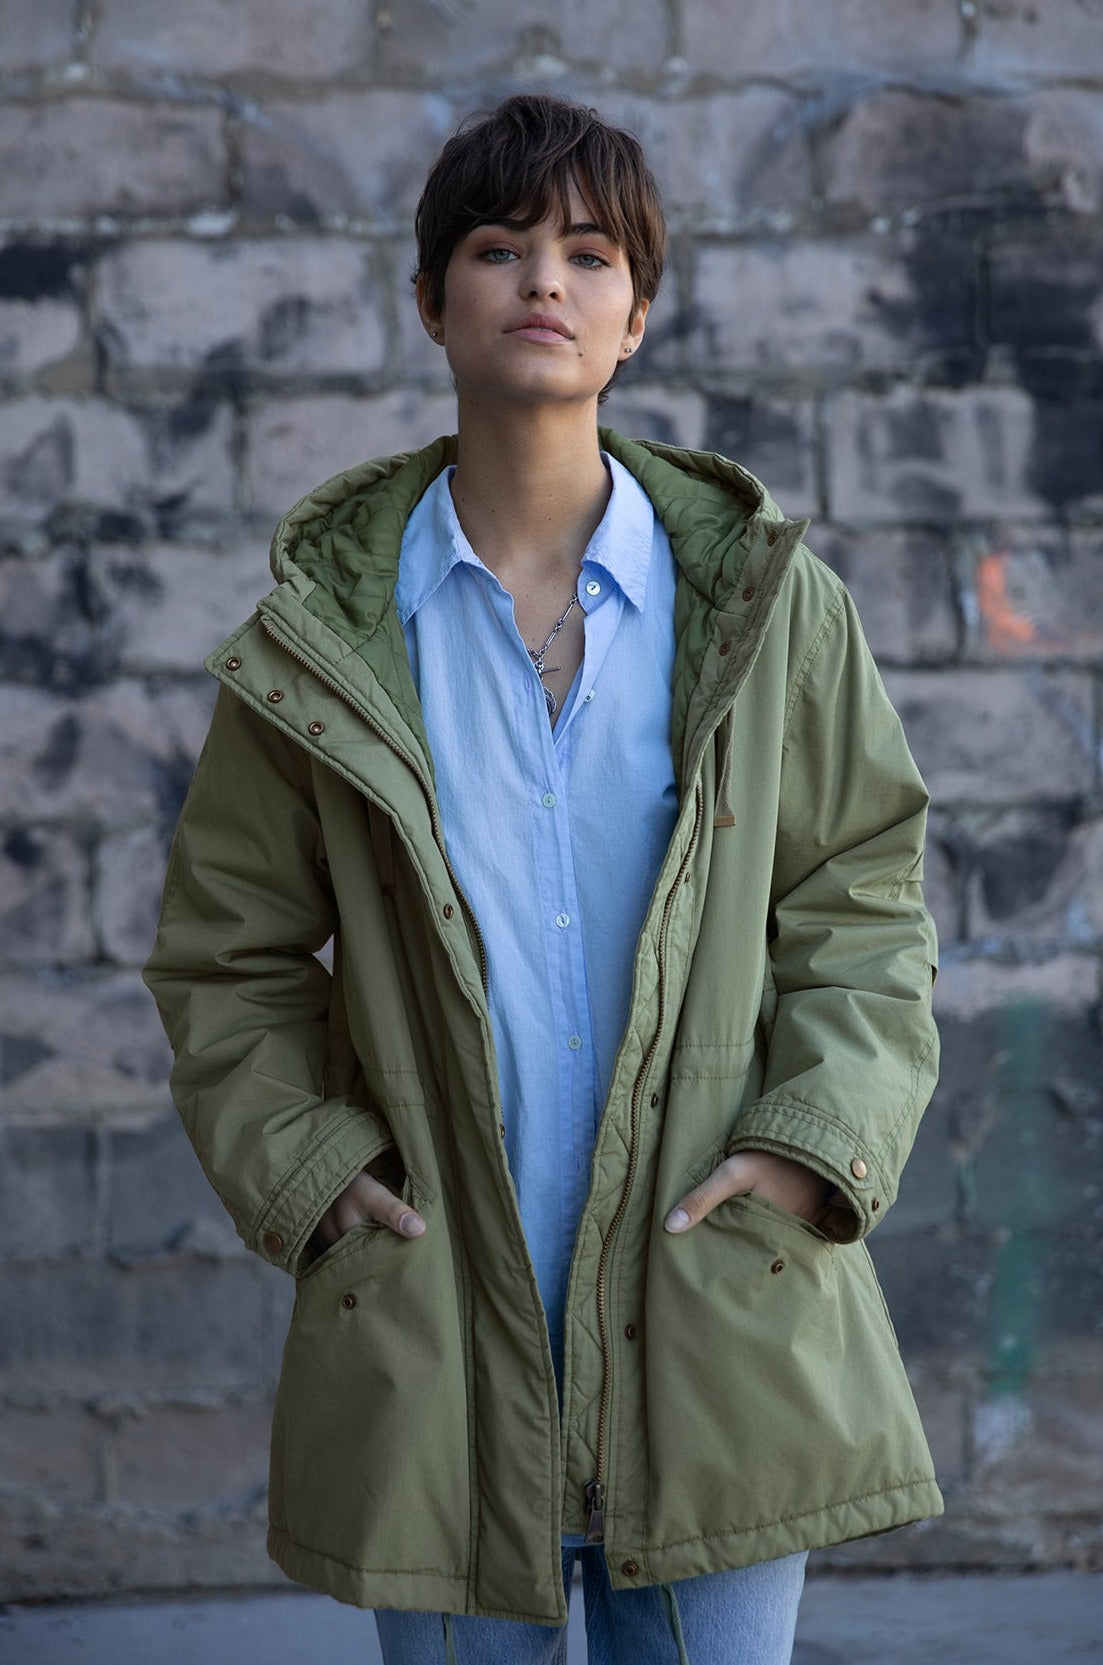   Cheviot Jacket in evergreen layered over Redondo shirt in mist blue front model hands in pockets. 